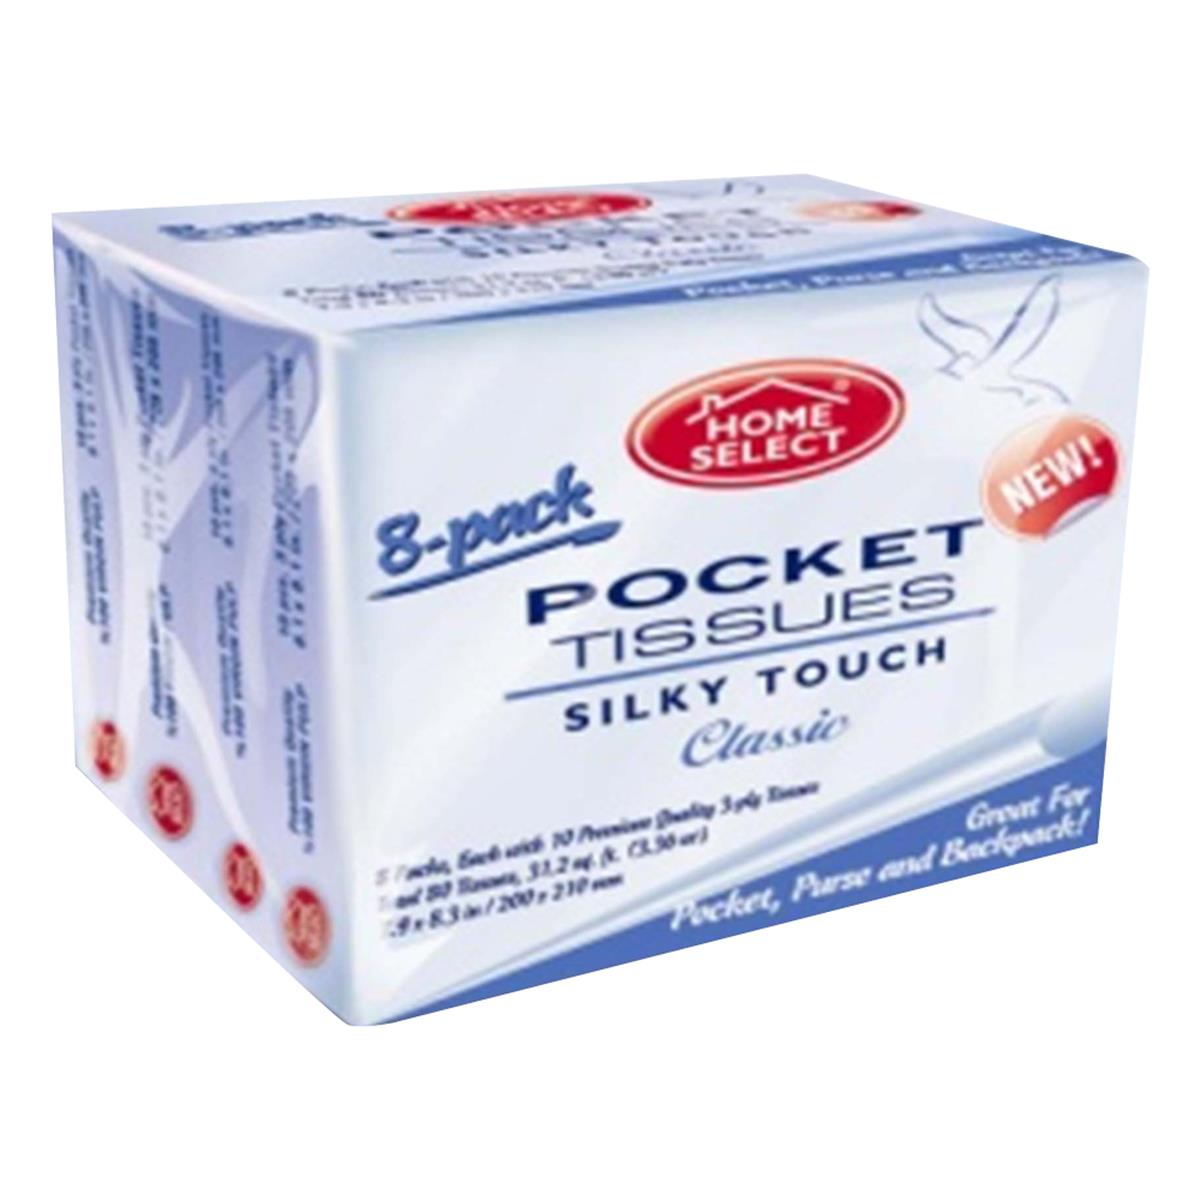 4021-24 Pe 2 Ply Home Select Classic Silky Touch Pocket Tissue, Case Of 192 - 8 Per Pack